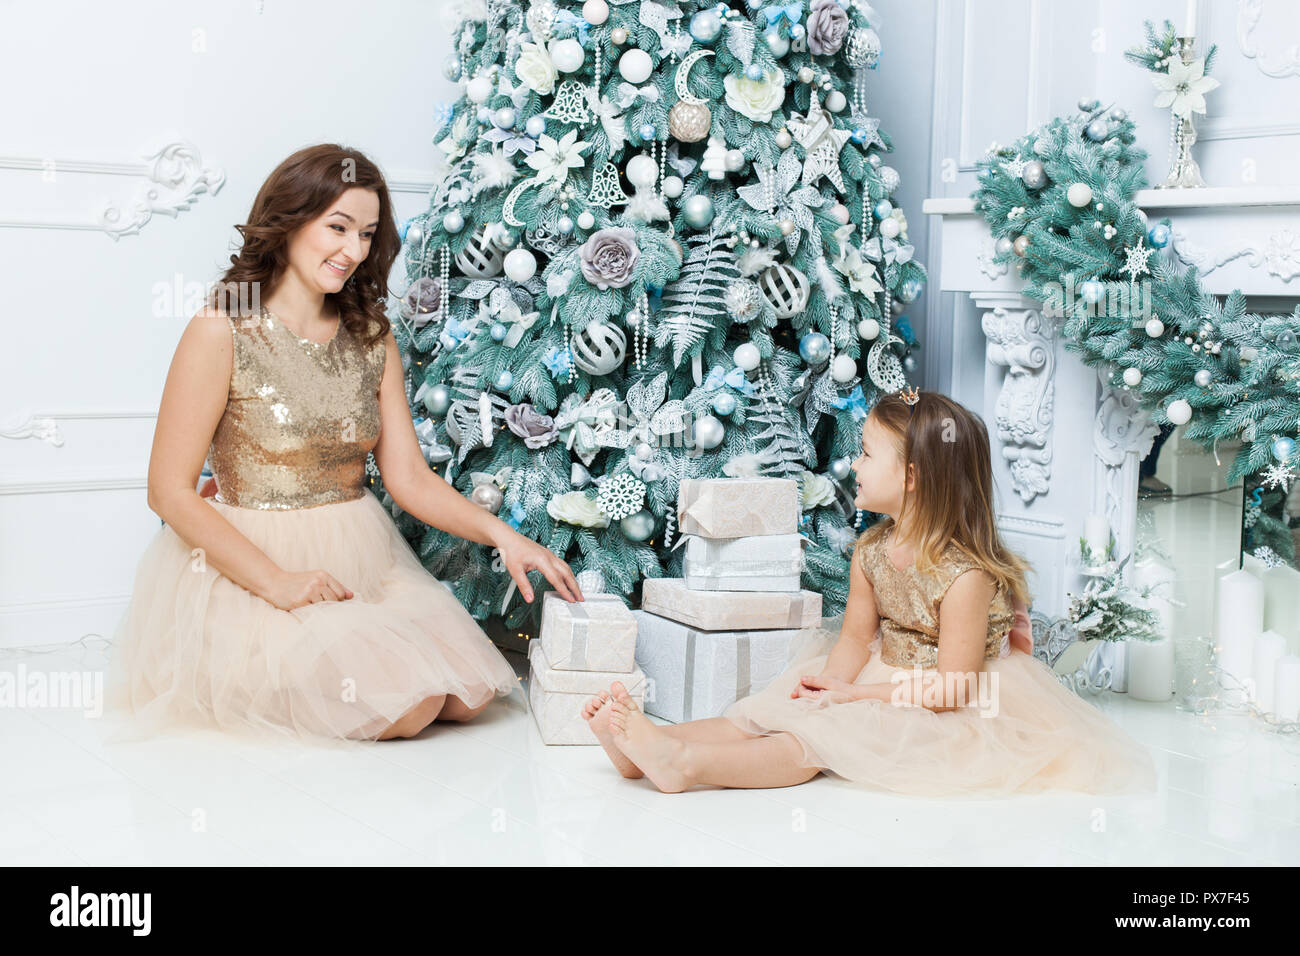 Mom and daughter sitting under the Christmas tree near the boxes with gifts. Stock Photo